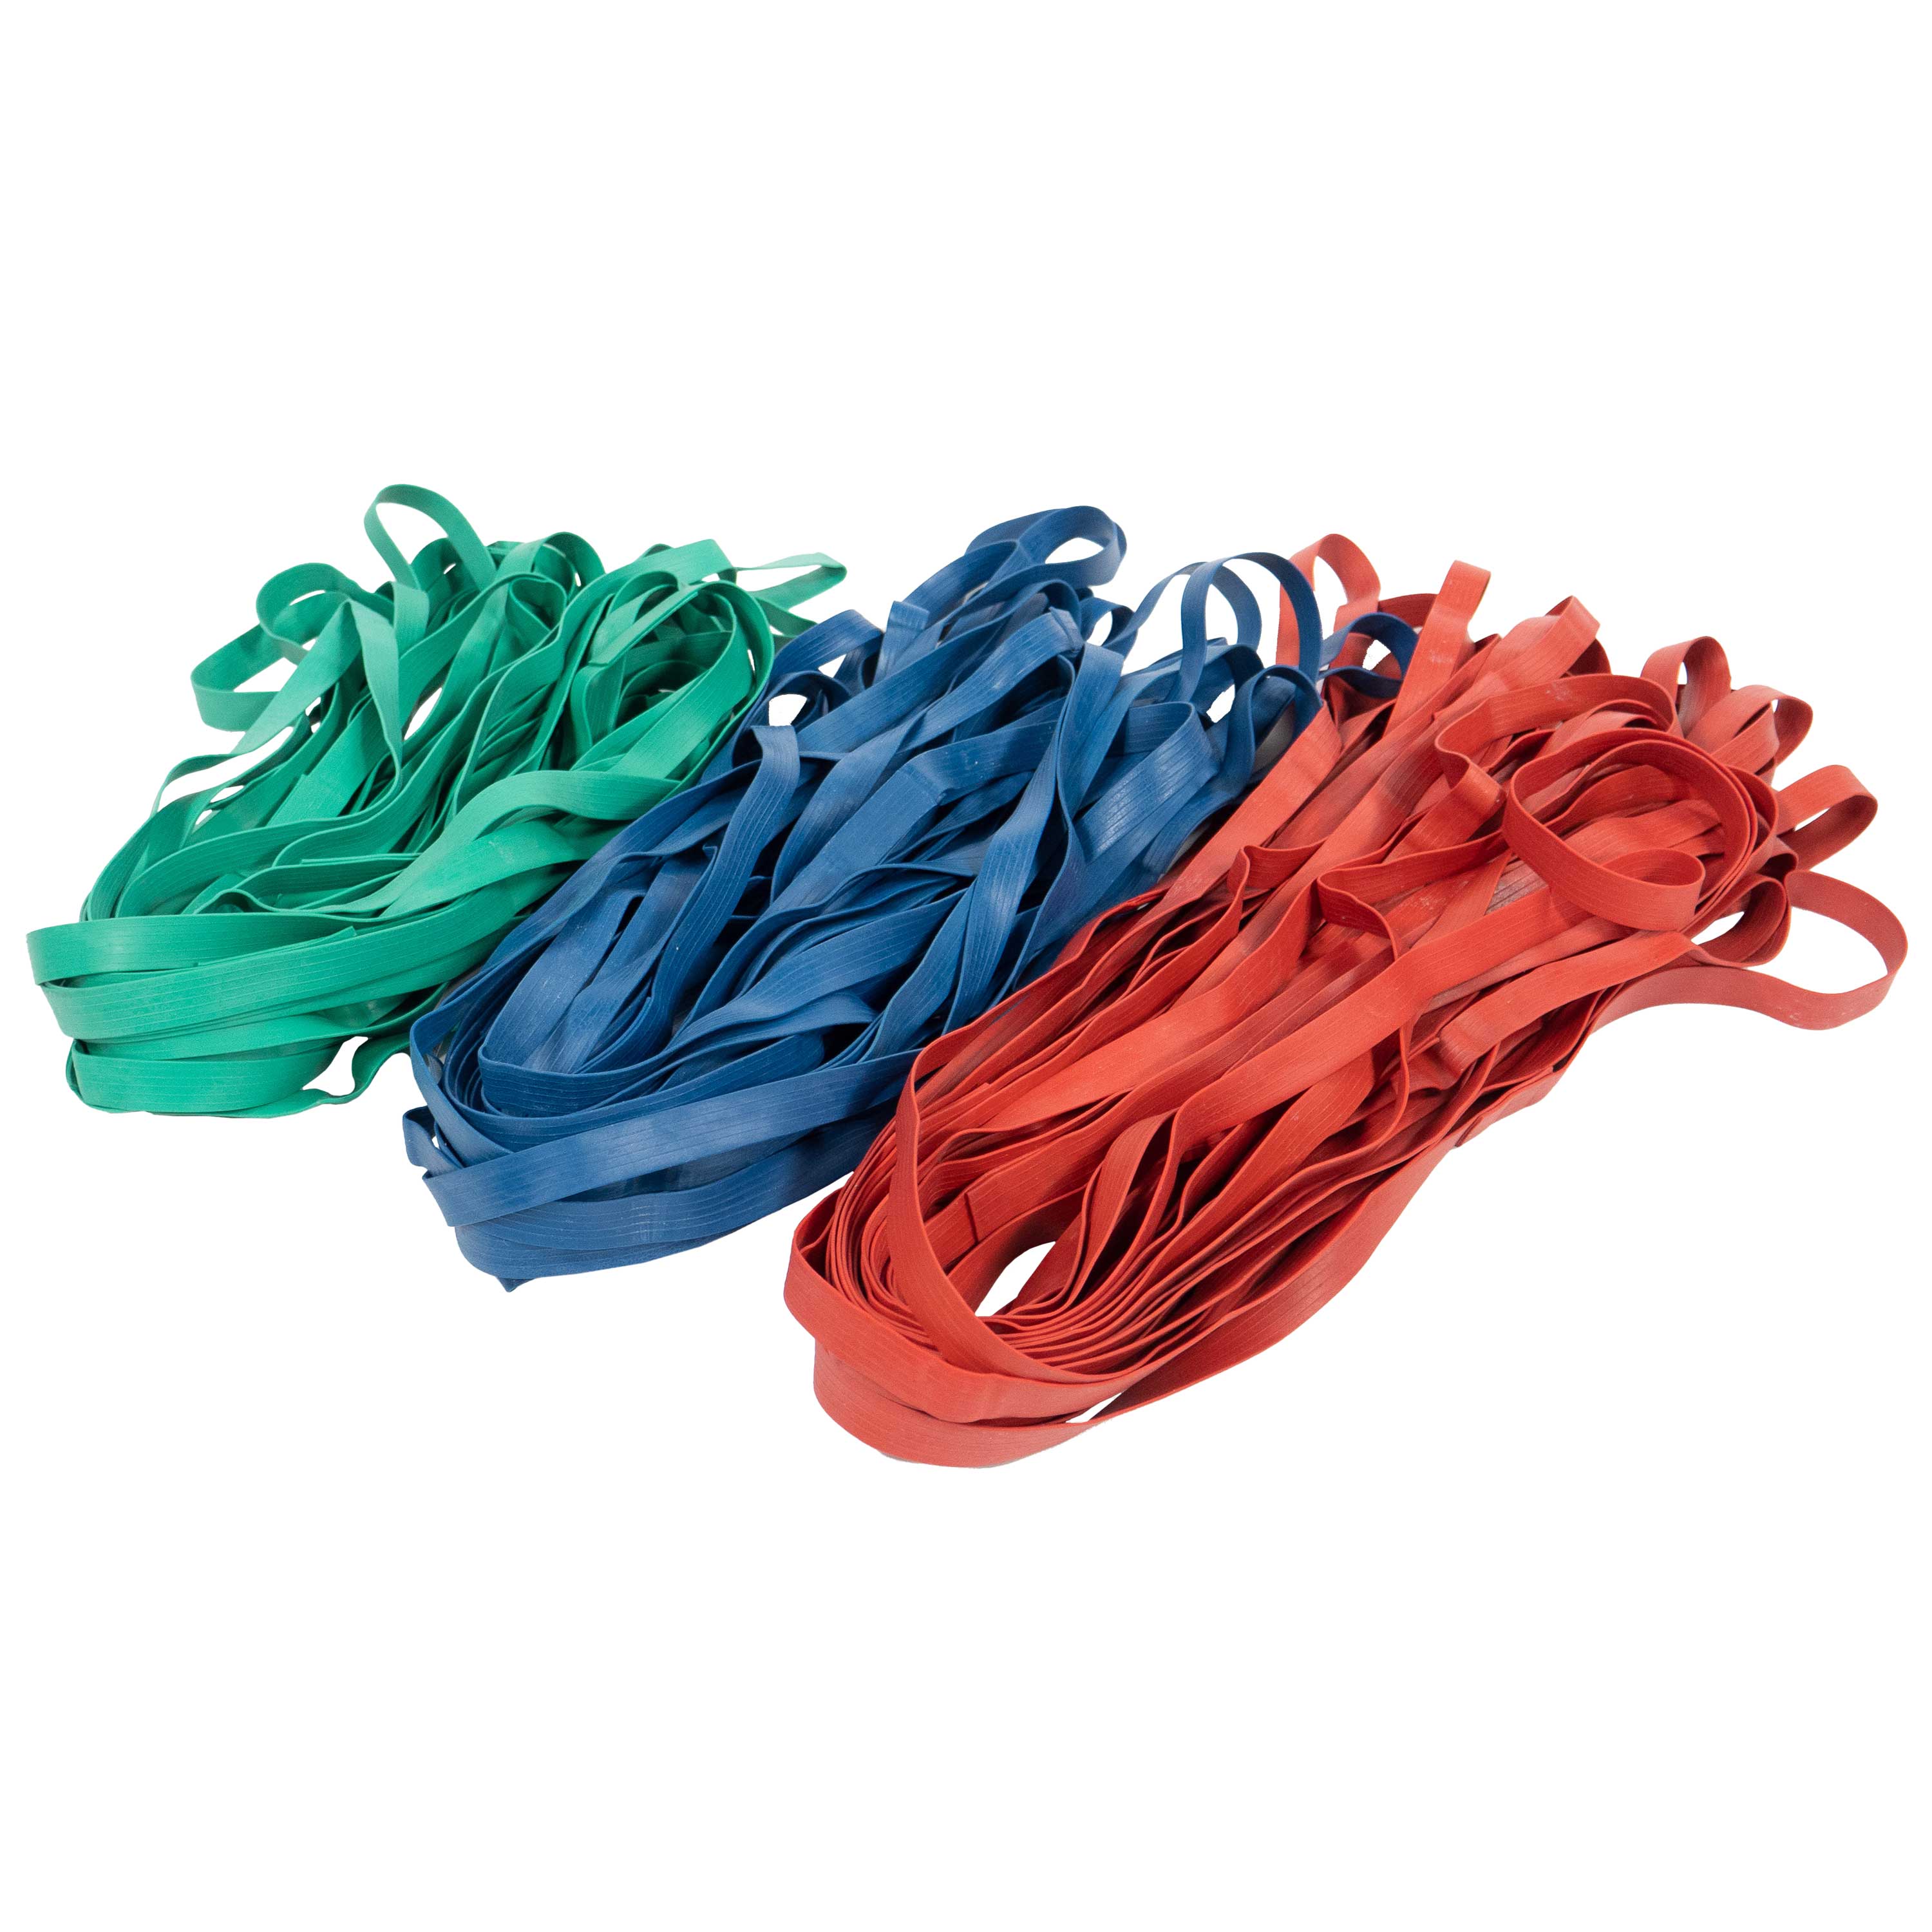 US Cargo Control Extra Large Moving Bands Multi-Length - 36 Pack